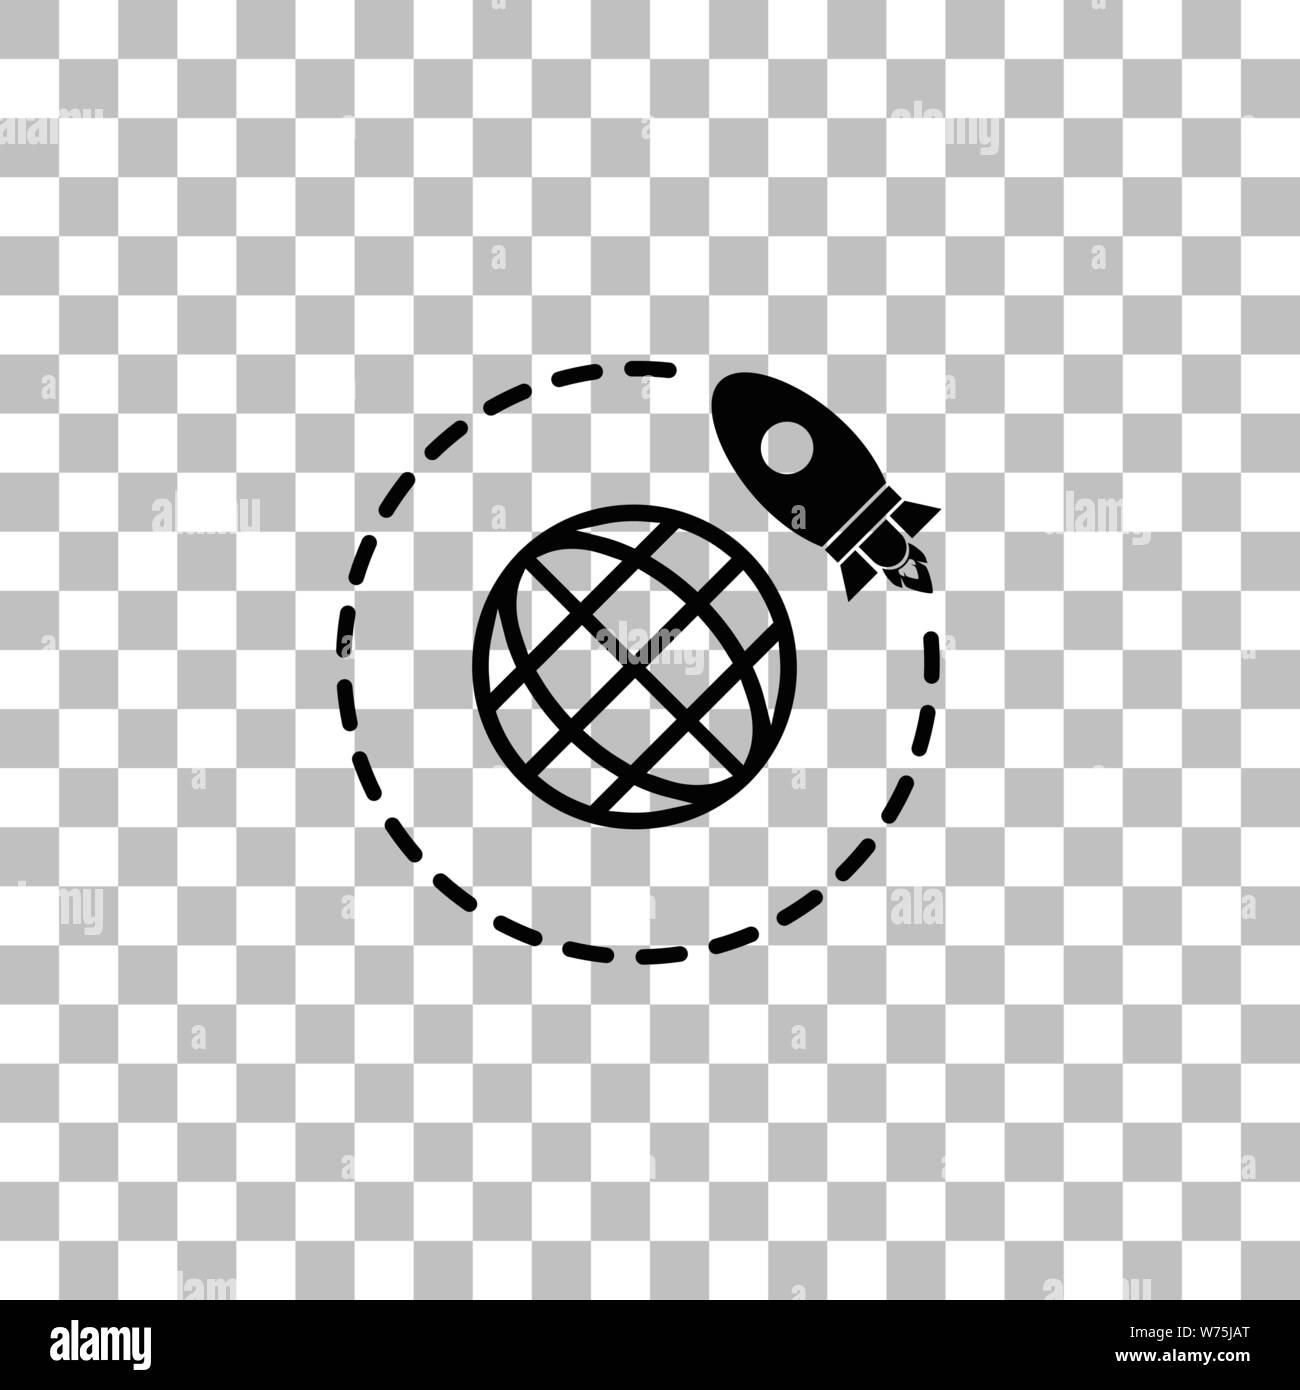 Go to Space. Black flat icon on a transparent background. Pictogram for your project Stock Vector